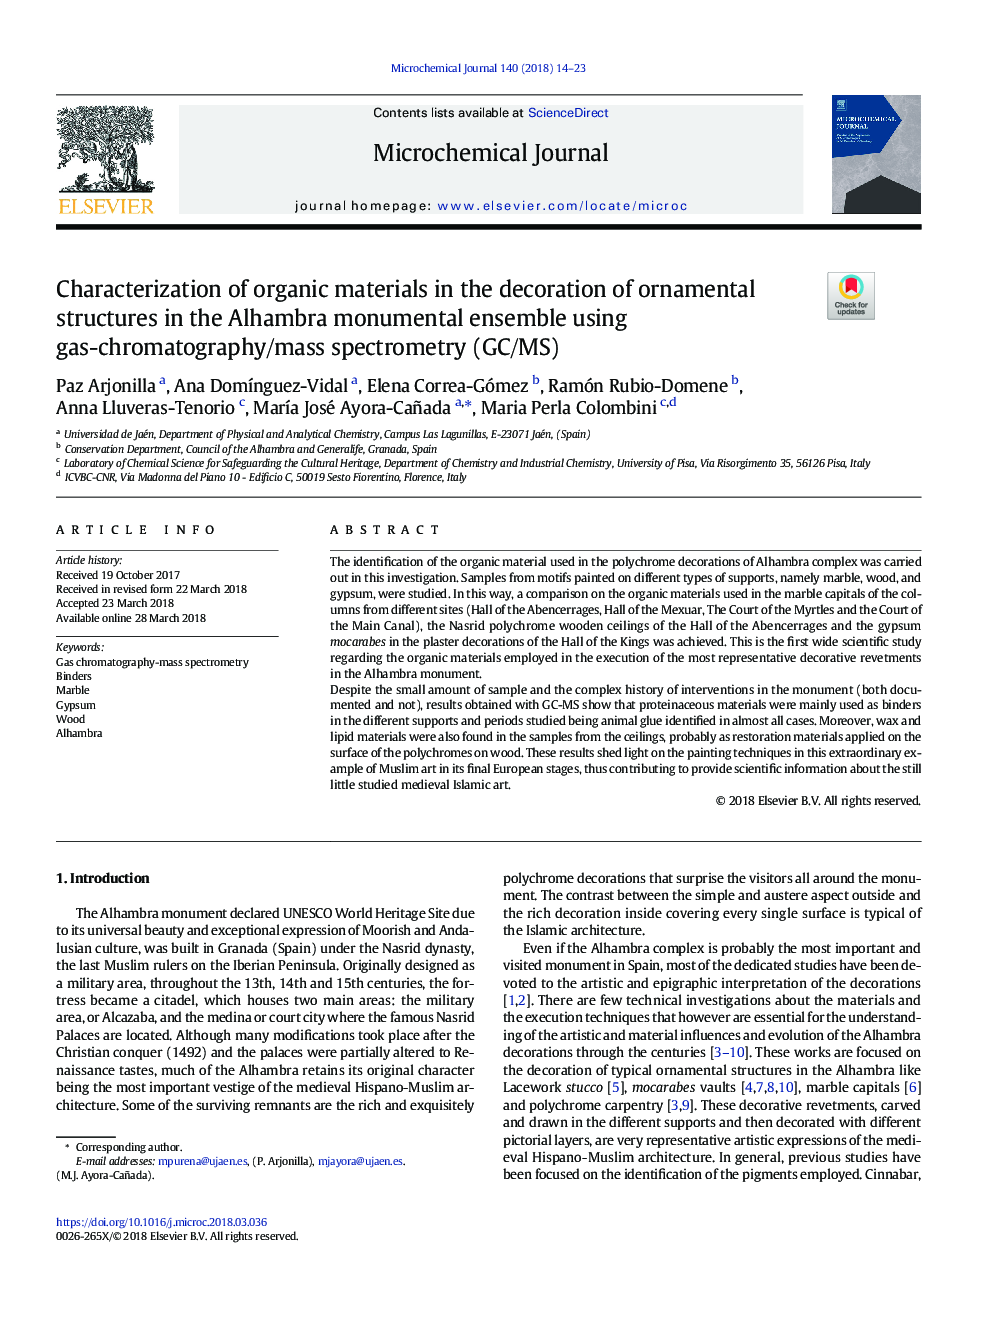 Characterization of organic materials in the decoration of ornamental structures in the Alhambra monumental ensemble using gas-chromatography/mass spectrometry (GC/MS)